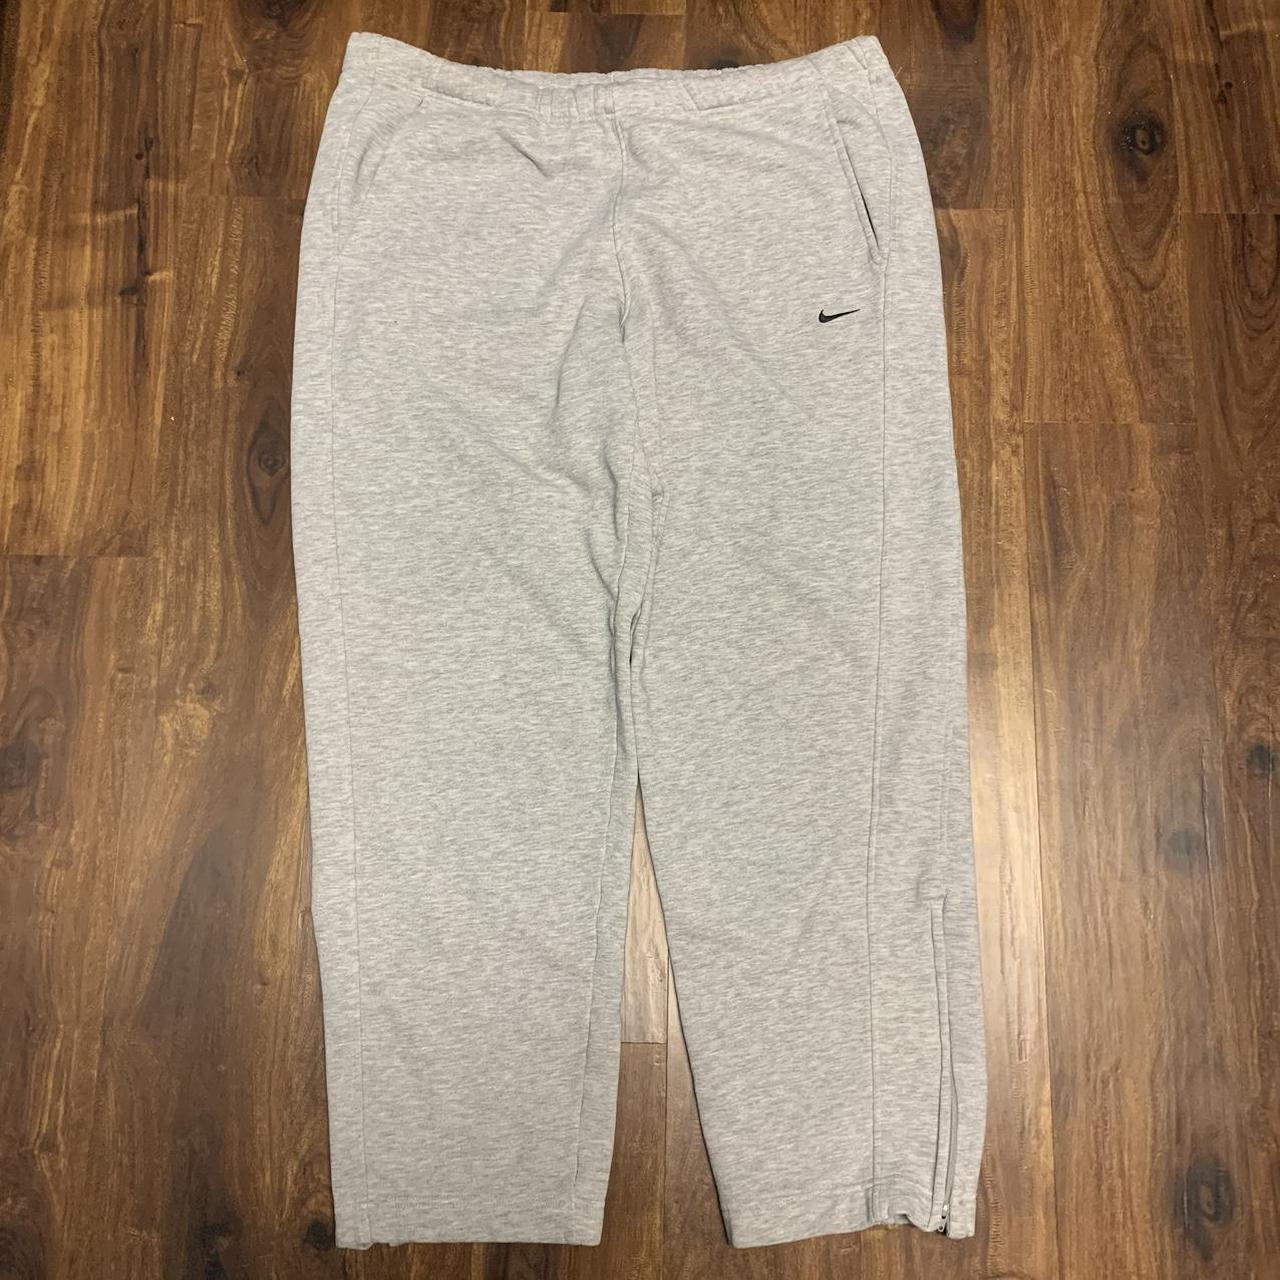 Nike Men's Grey and Black Joggers-tracksuits (2)